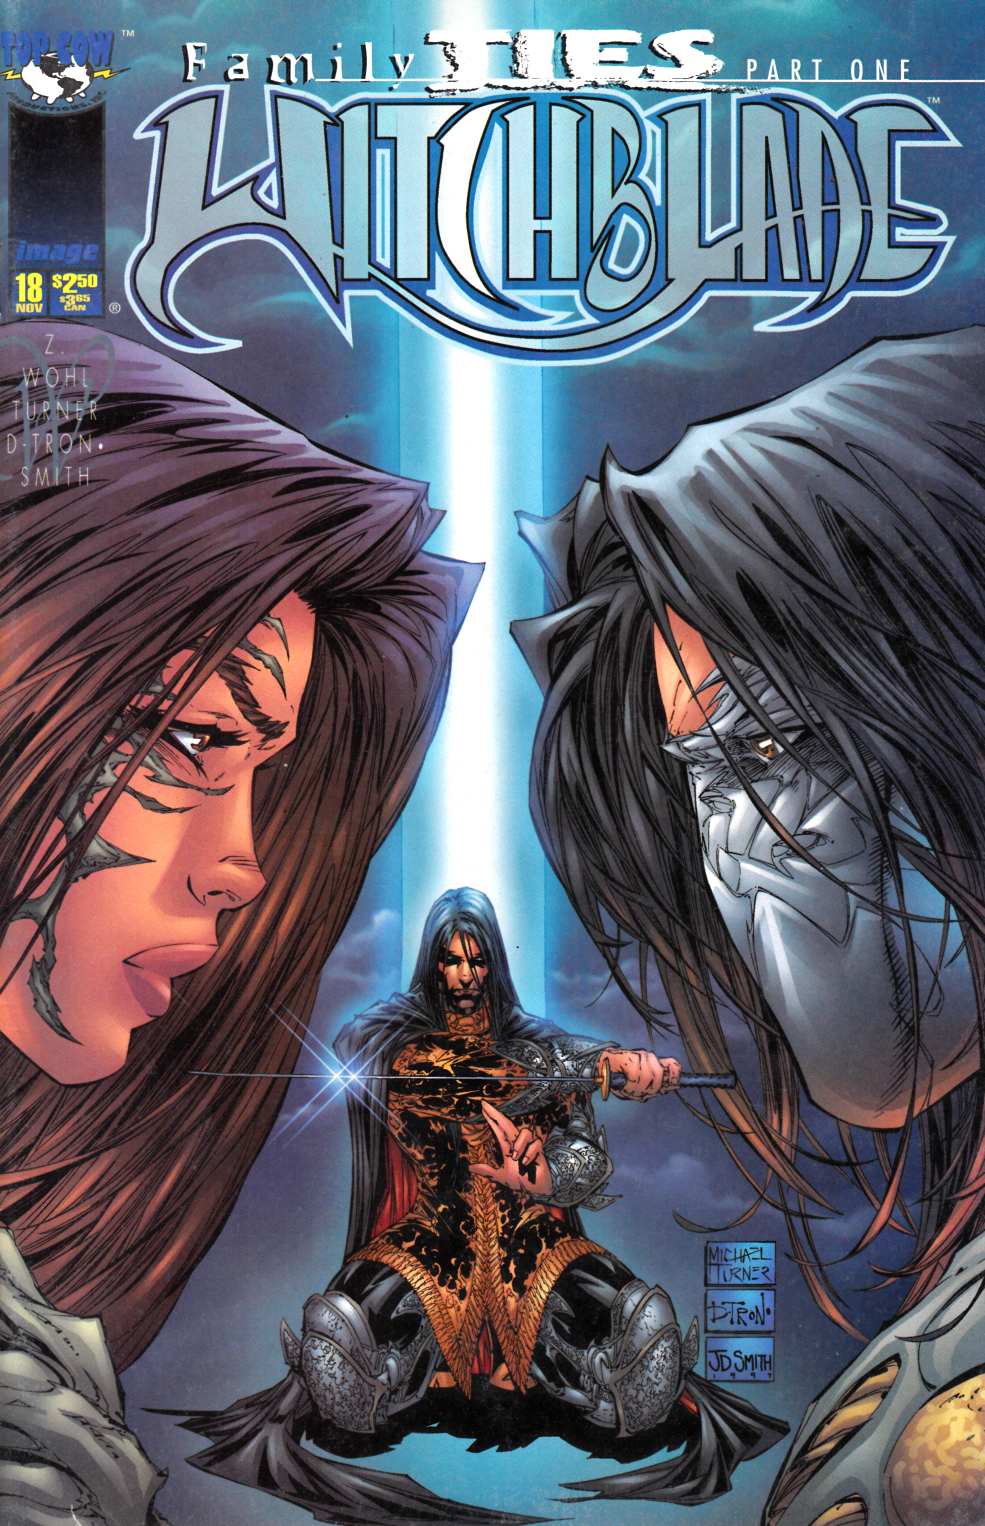 witchblade covers michael turner